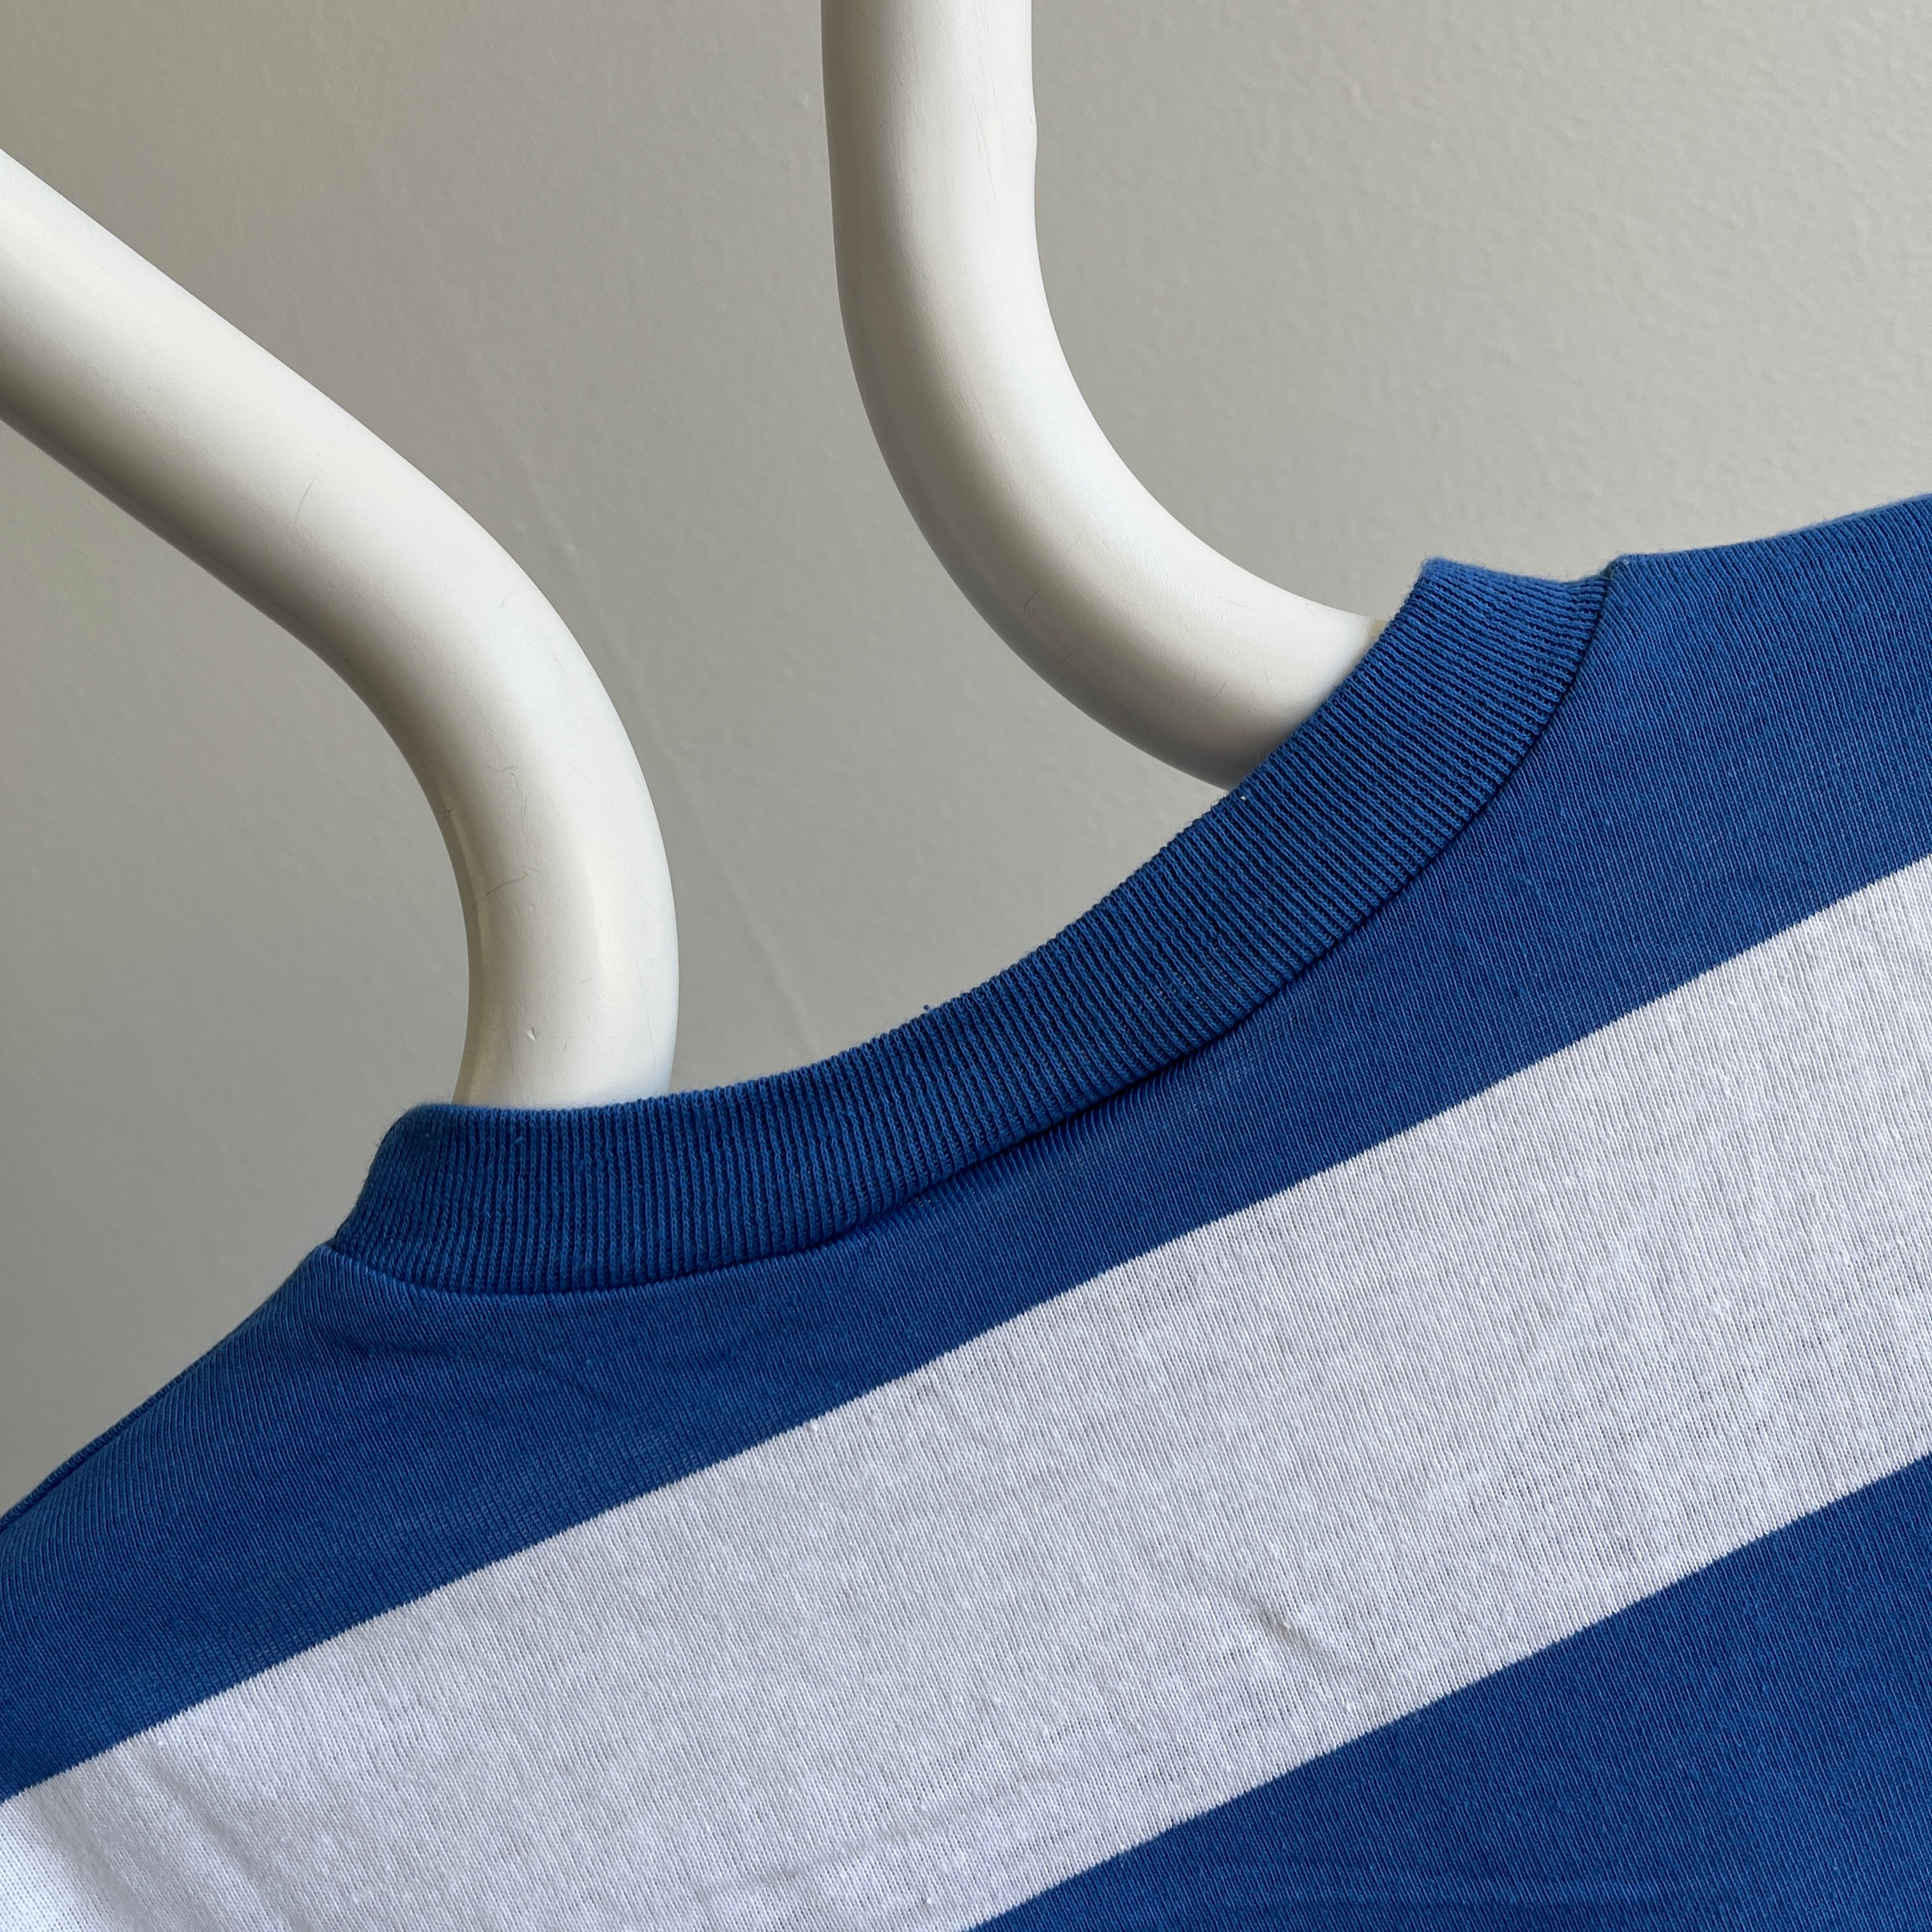 1980s Blue and White Striped Long Sleeve Pocket T-Shirt